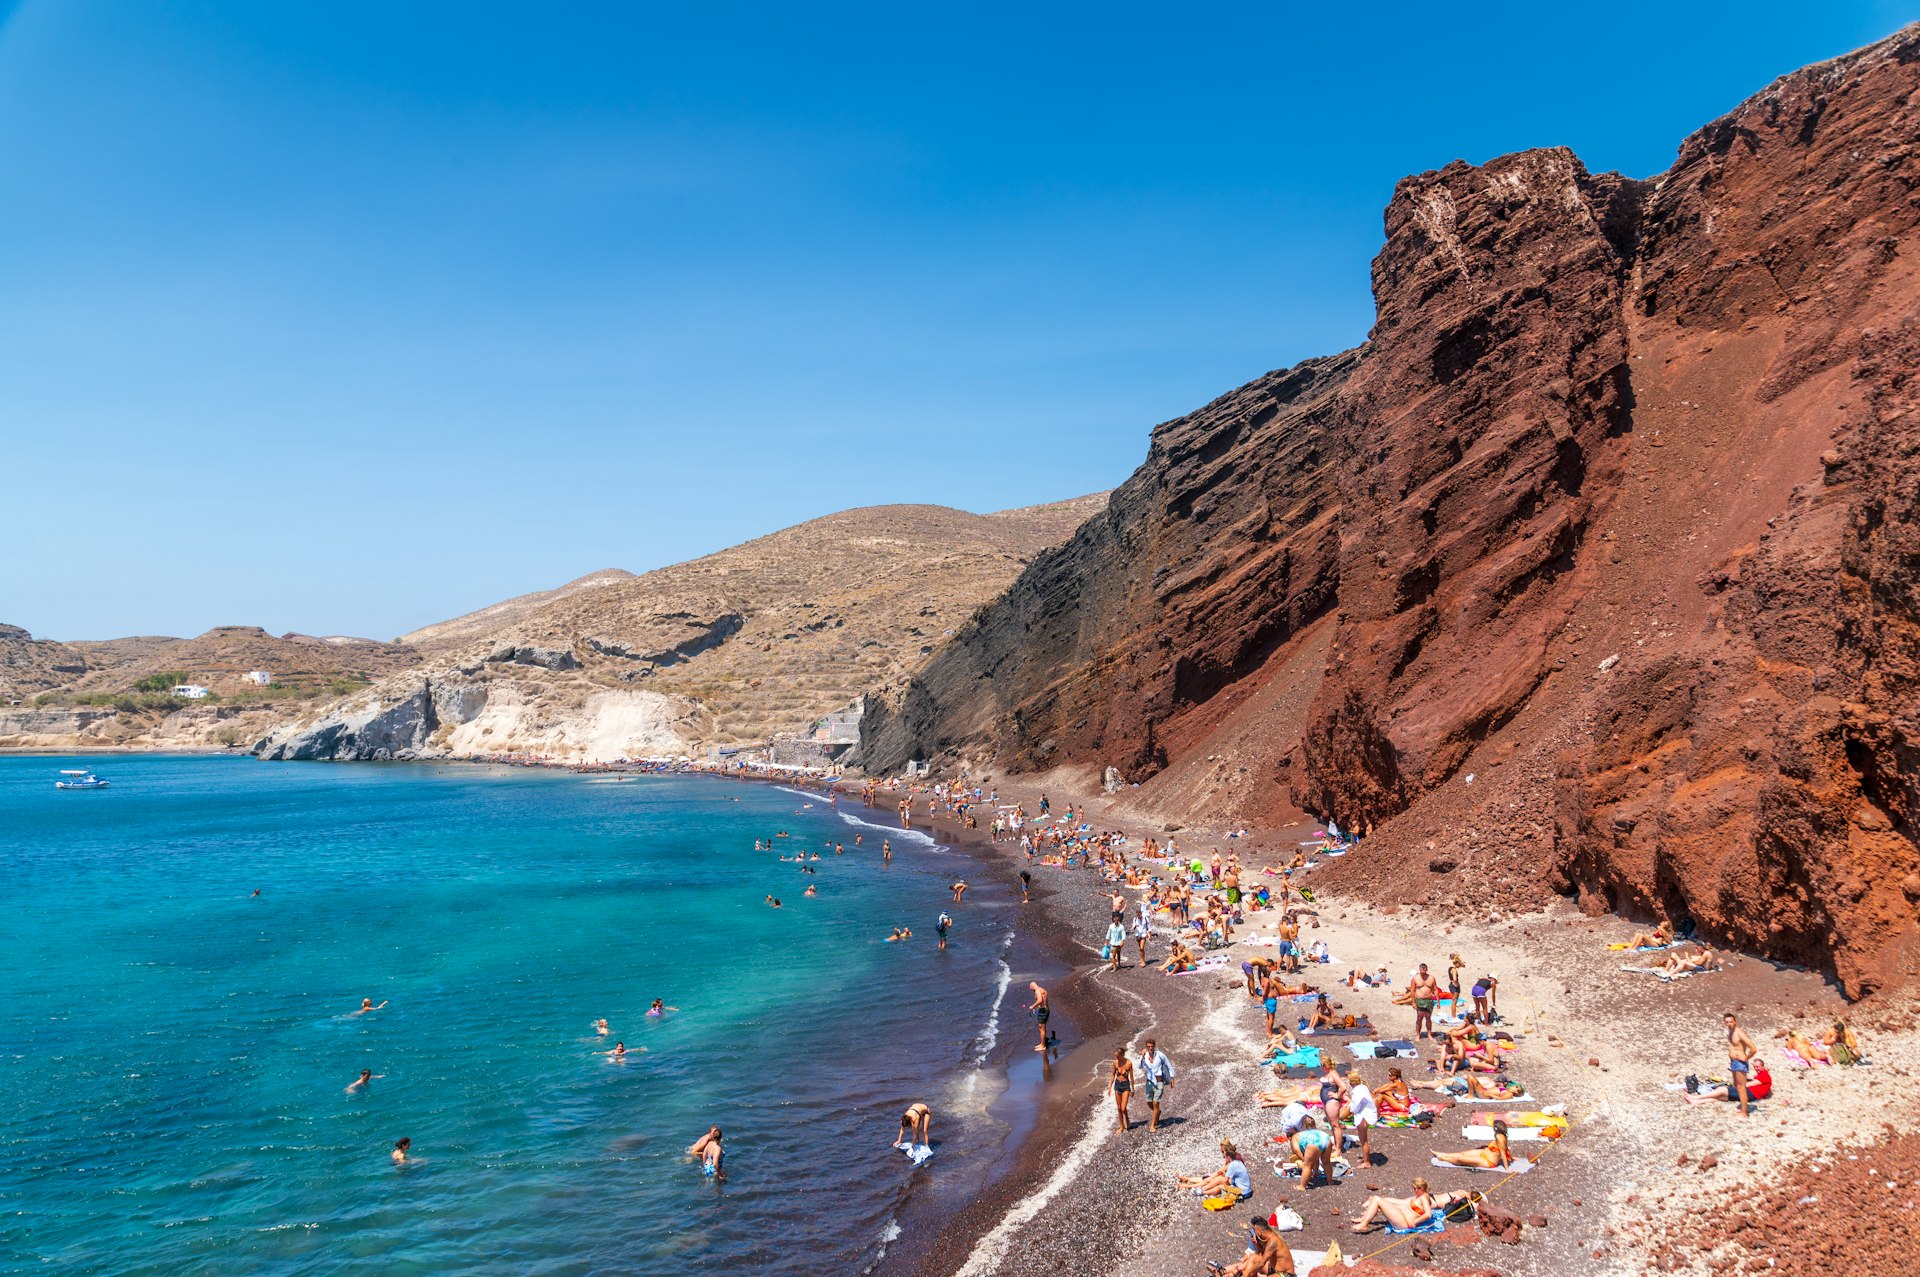 Sunbeds lined up against the red cliffs of the famous Red Beach on the island of Santorini, Greece